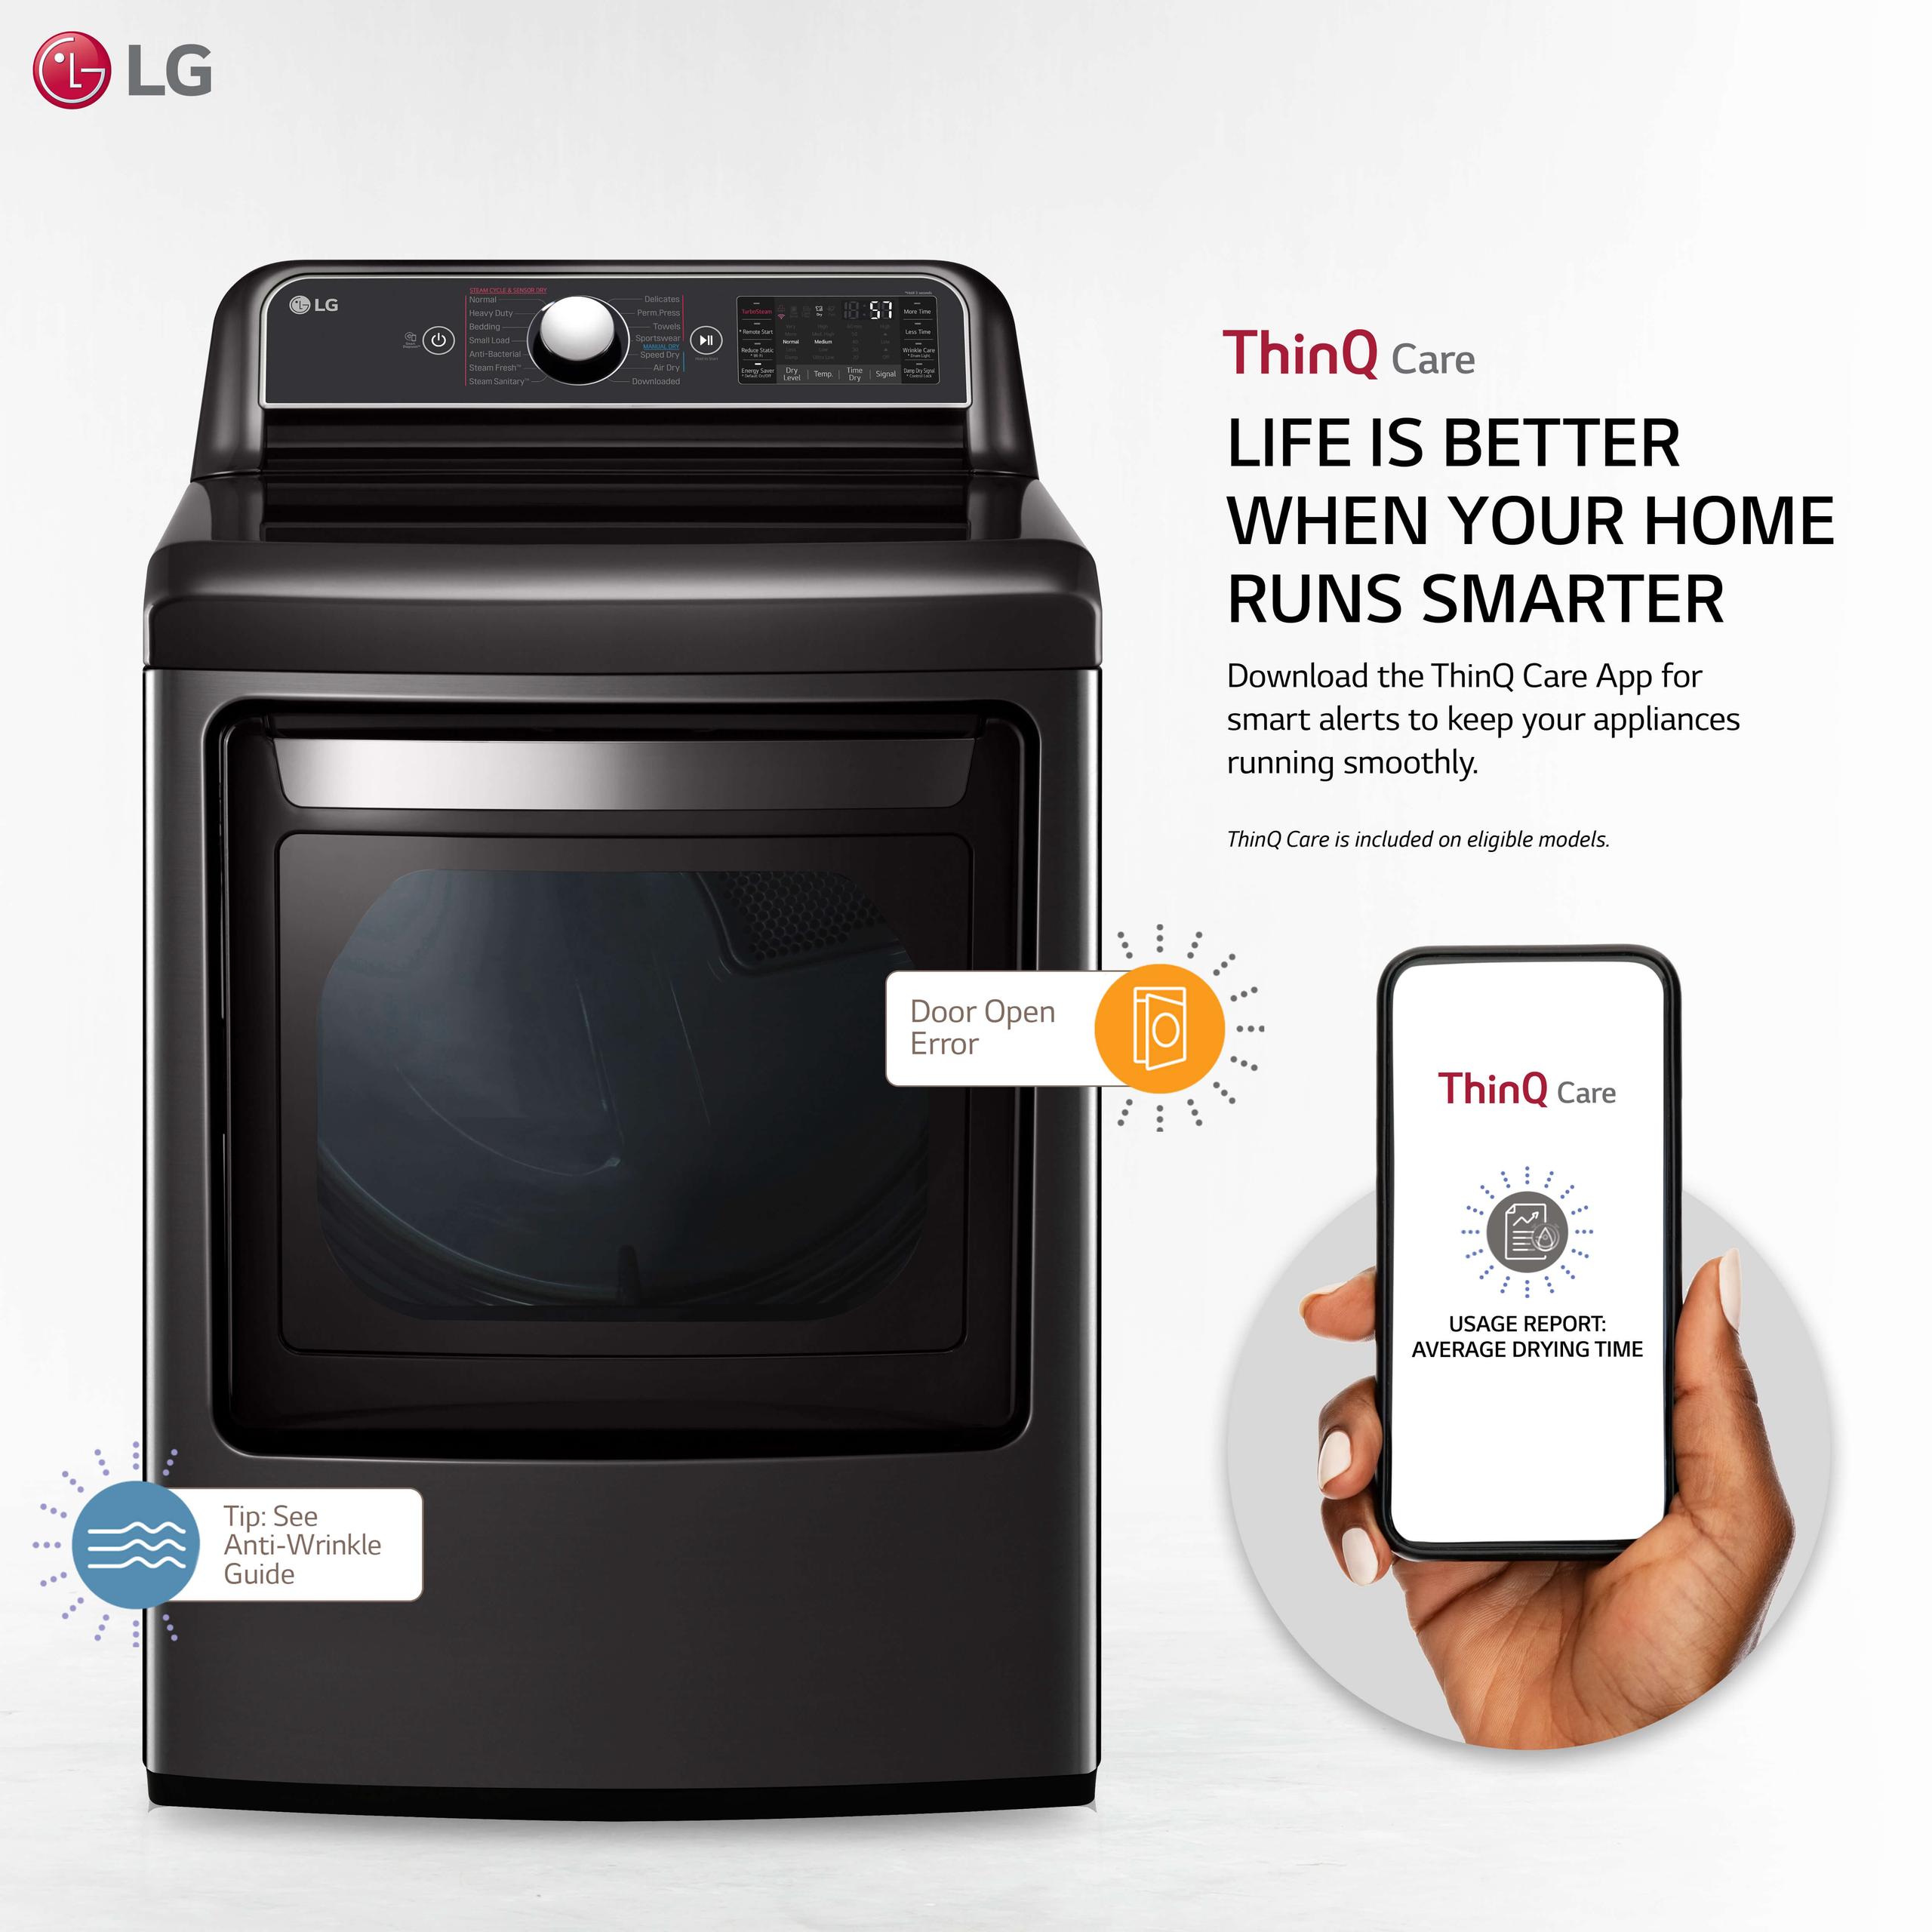 LG DLEX7900BE 7.3 Cu. Ft. Smart Wi-Fi Enabled Electric Dryer with TurboSteam - Black Steel - image 2 of 5